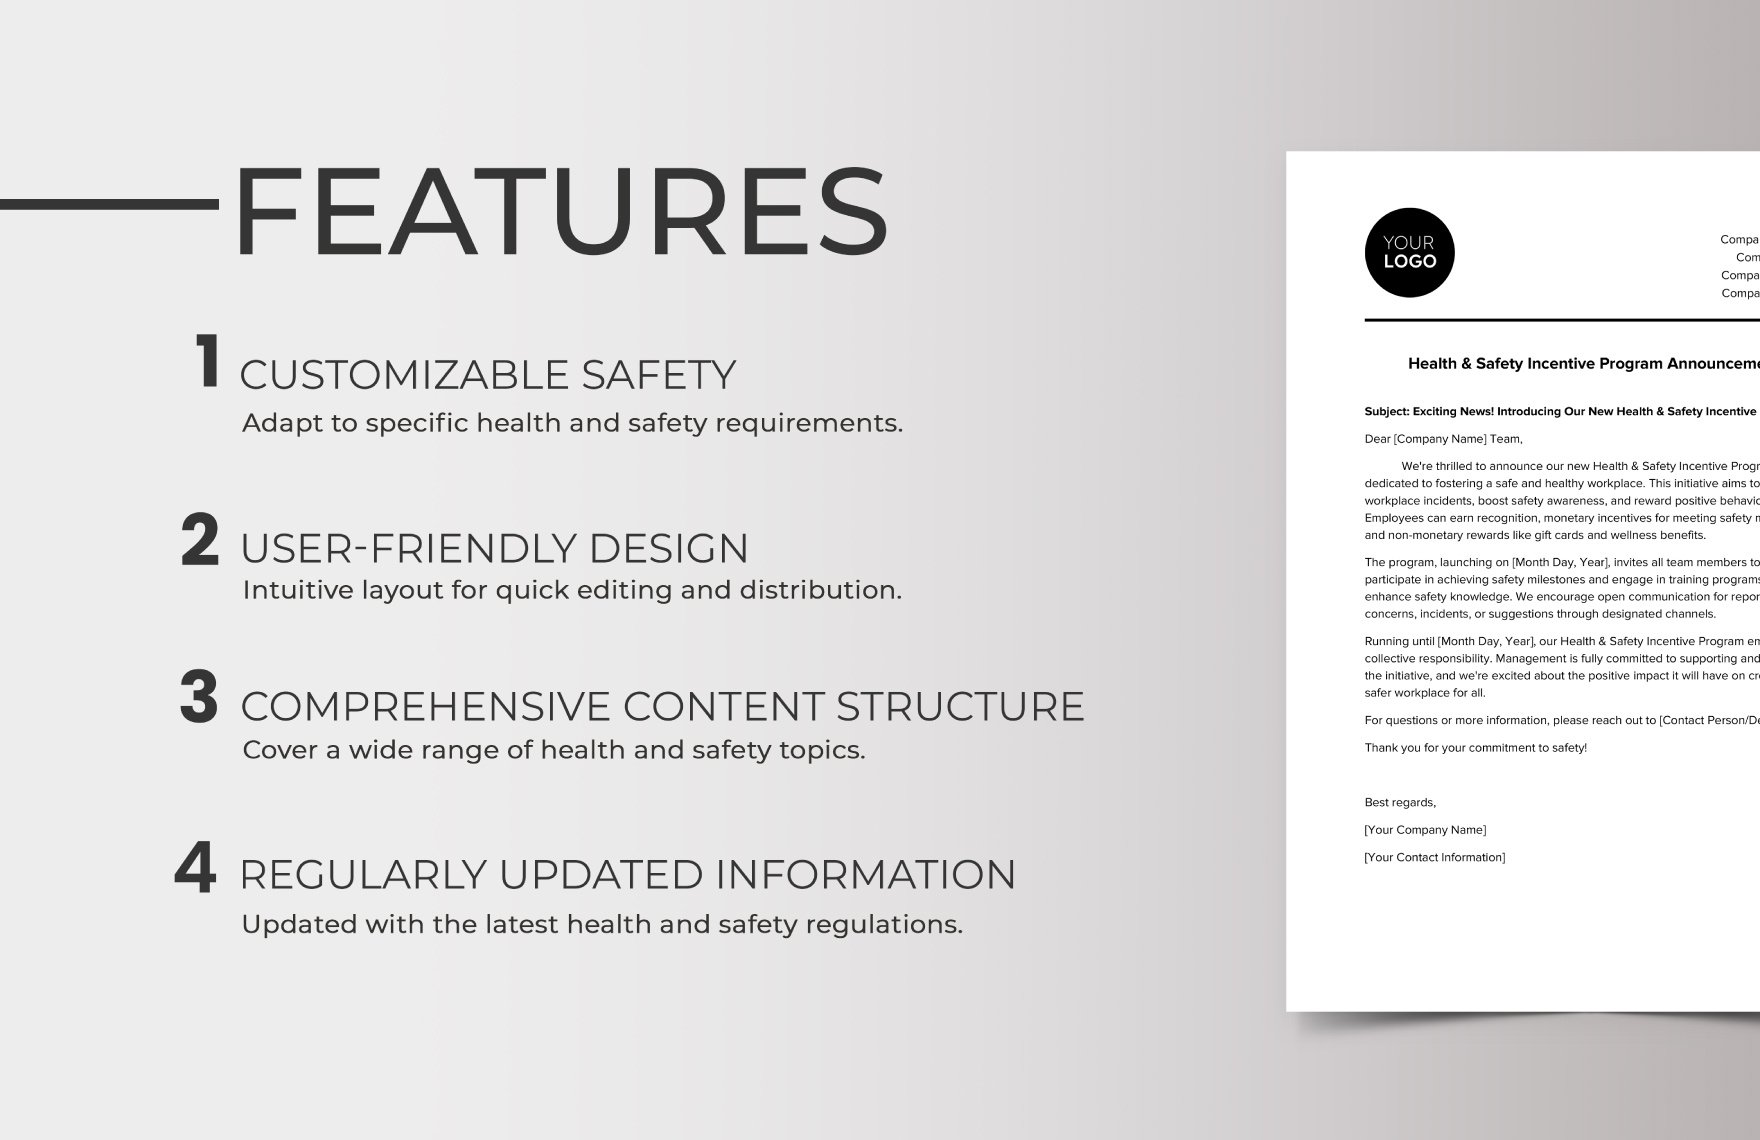 Health & Safety Incentive Program Announcement Template